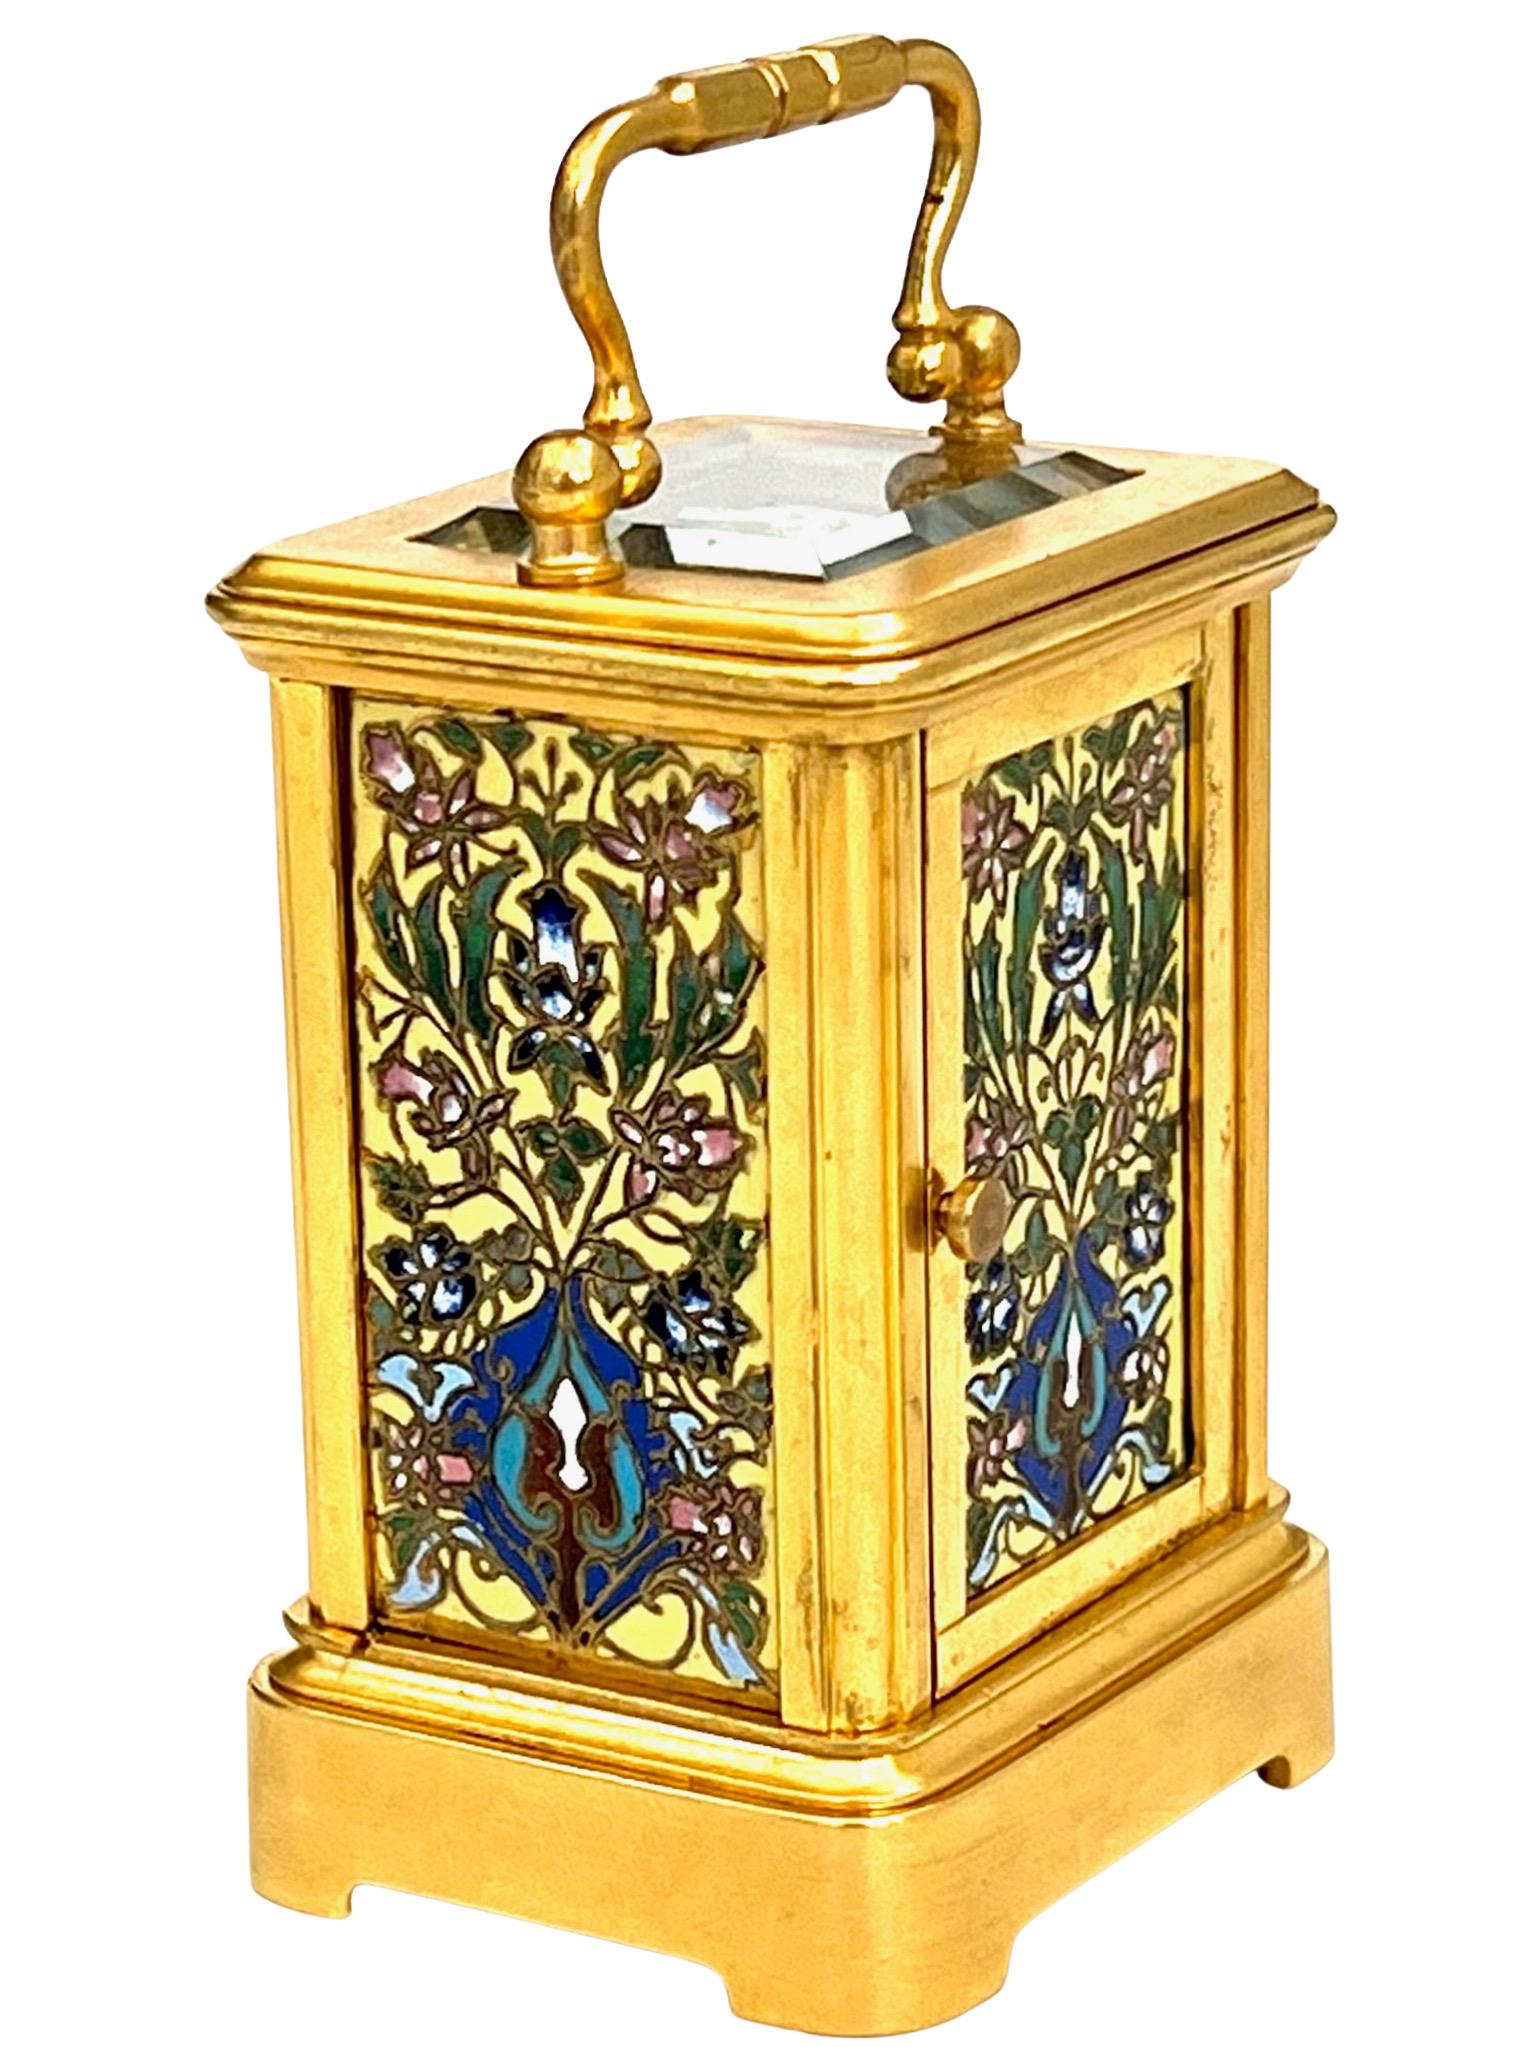 French Miniature Timepiece 8 Day Carriage Clock With Champlevé Enamel Panels For Sale 1